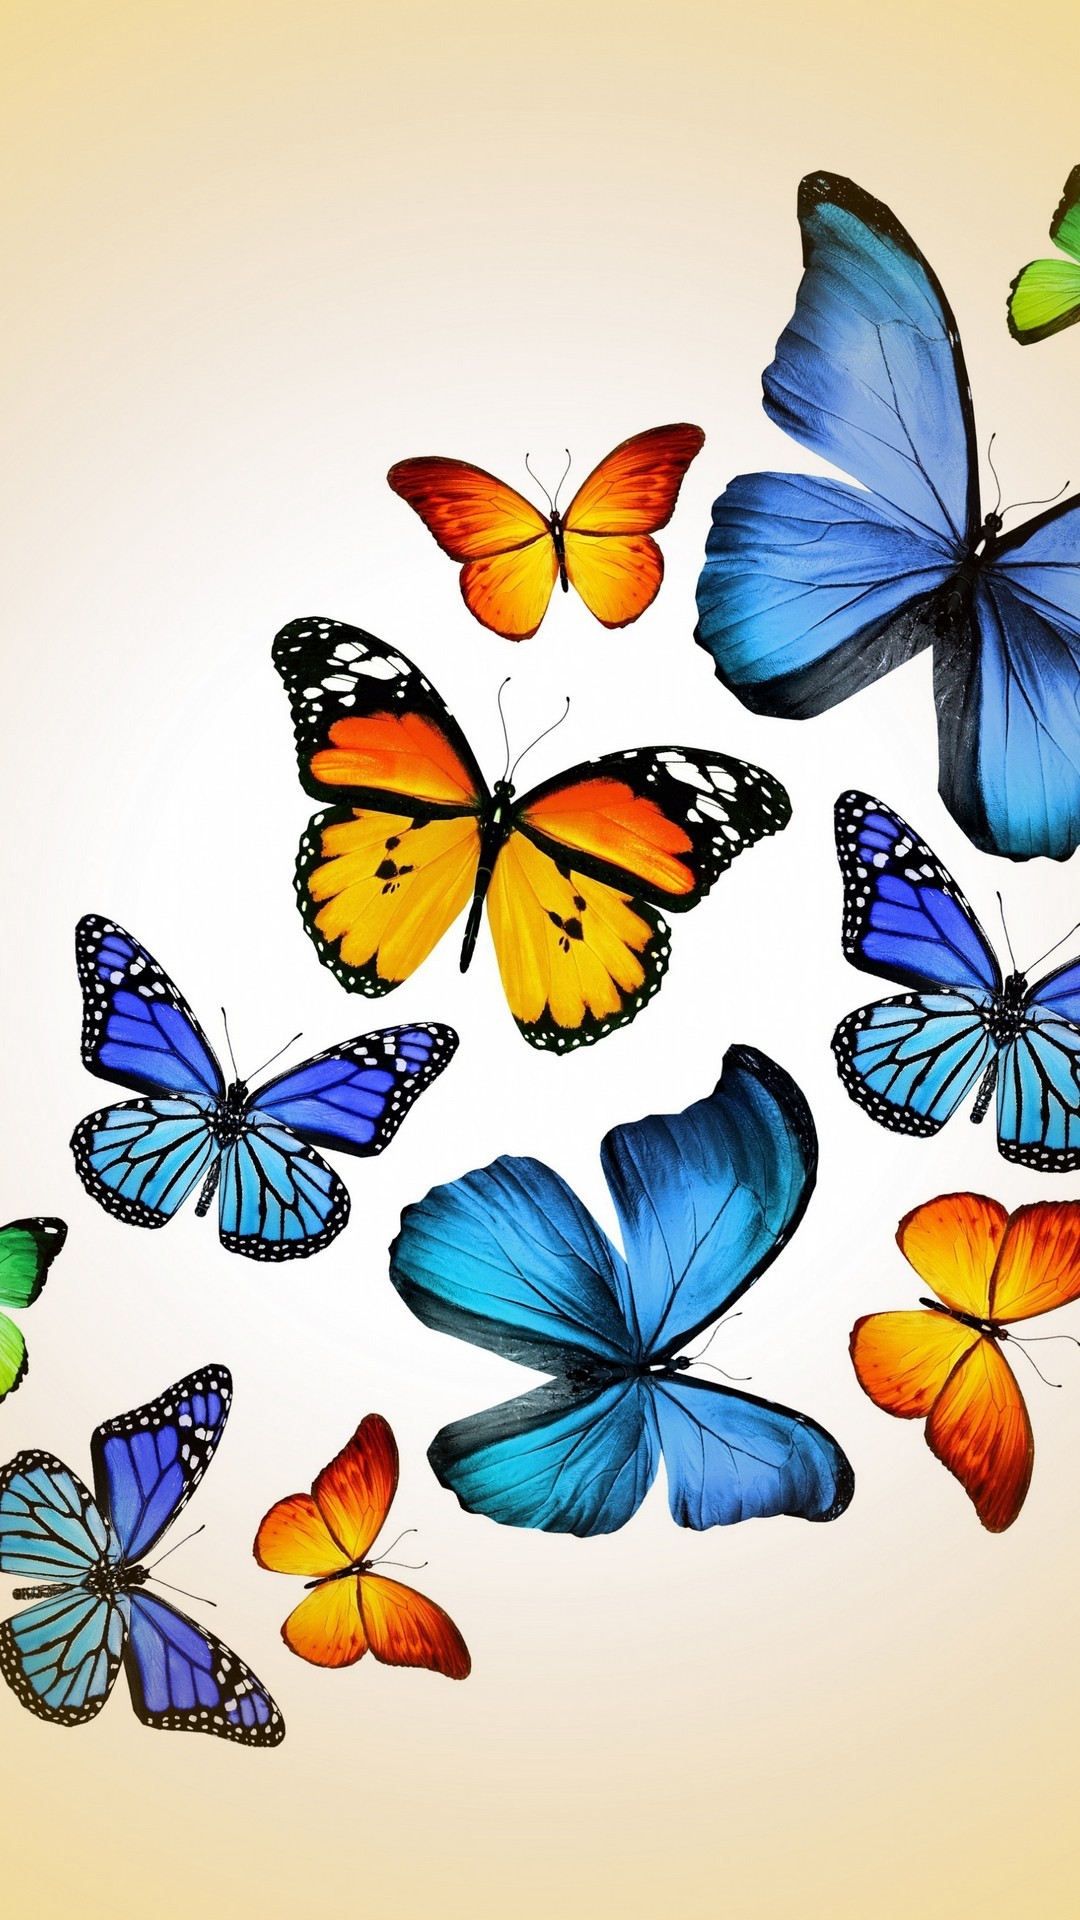 Cute Butterfly Android Wallpaper with HD resolution 1080x1920